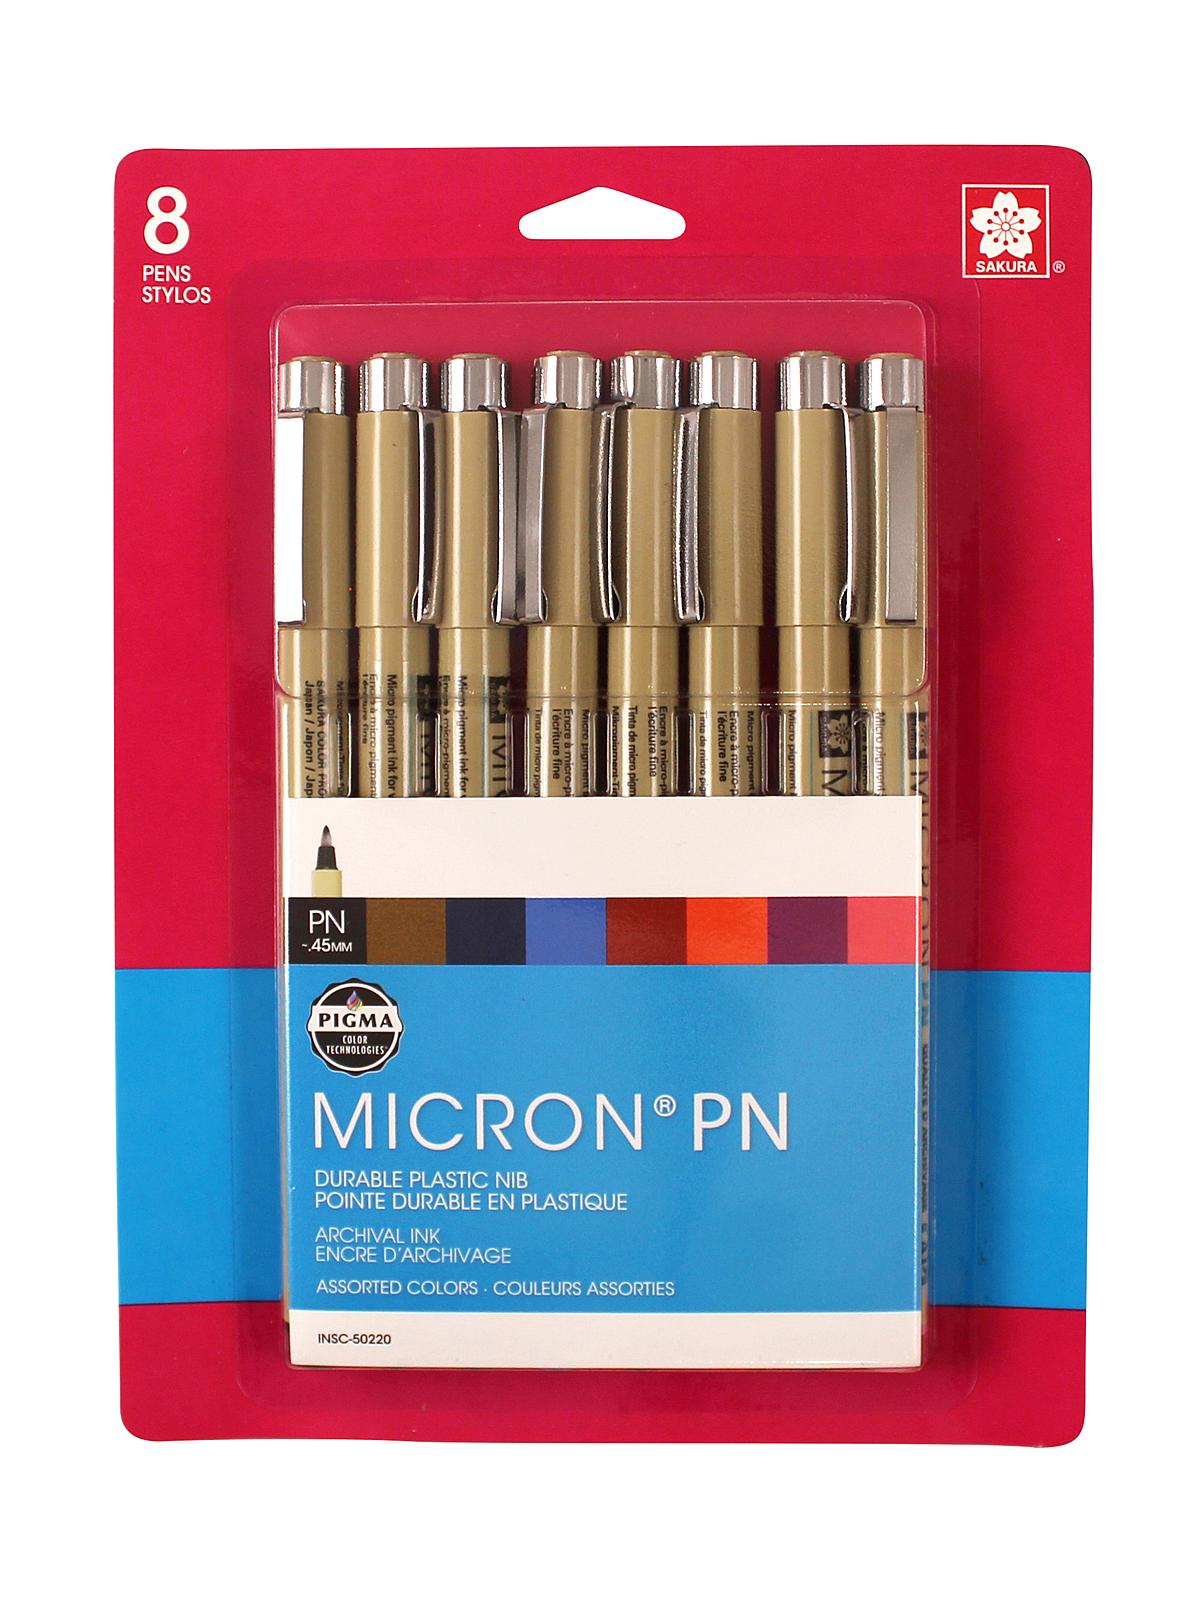 Pigma Micron PN Sets Assorted Set Of 8